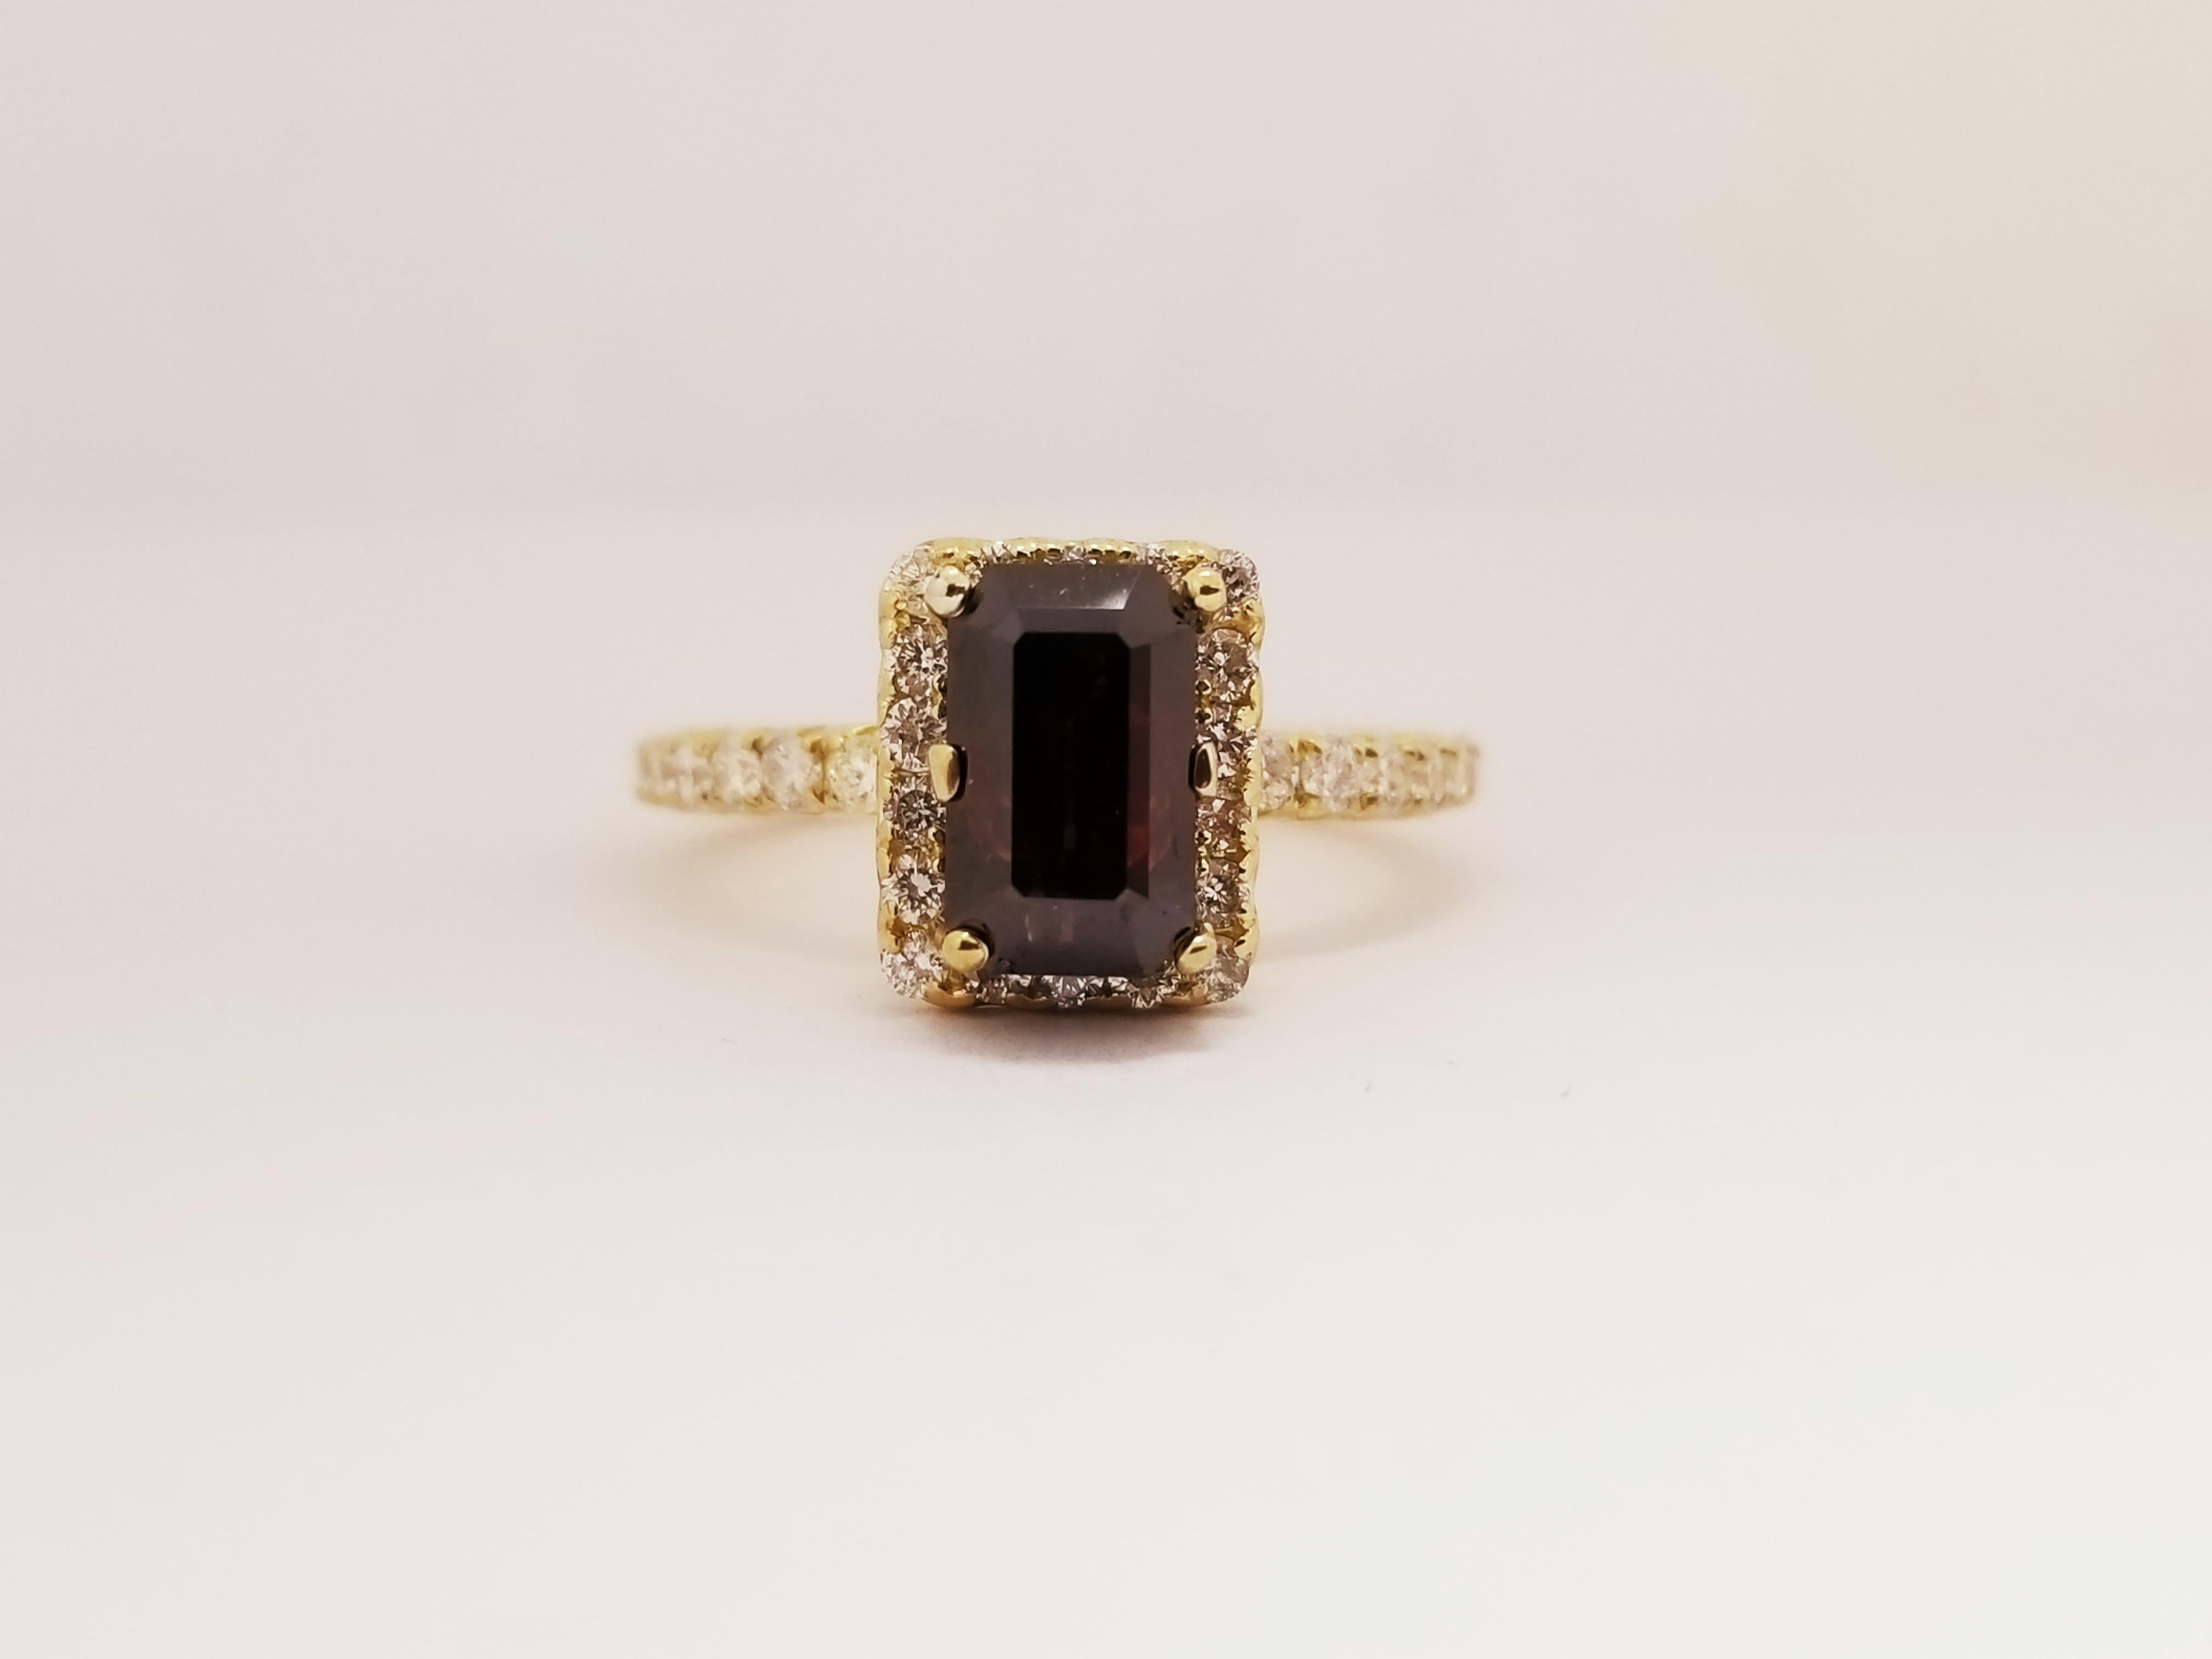 GIA fancy reddish brown emerald cut natural diamond ring weighing 2.36 carats.
Beautiful diamond ring with center stone with GIA that has some red rare color which makes the stone special.